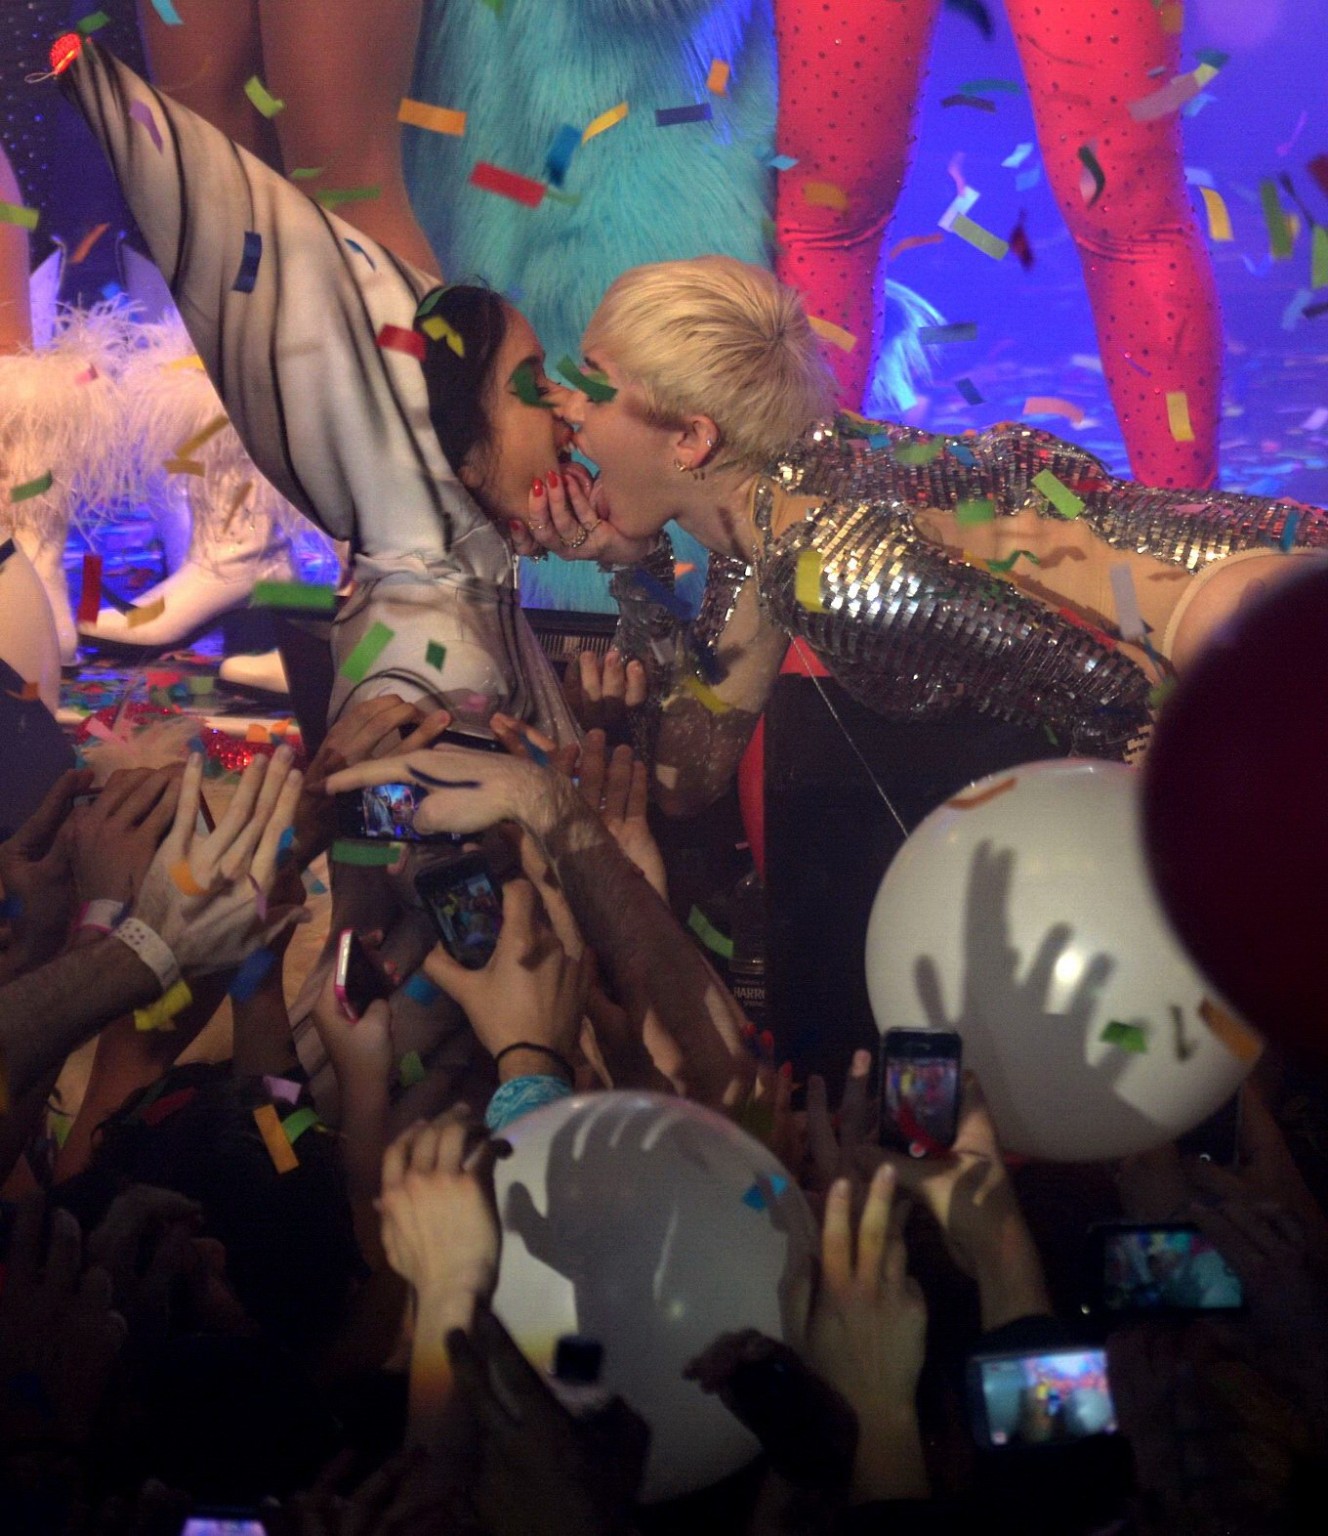 Miley Cyrus giving a blowjob to a blow up doll on stage at GAY Club in London #75197048